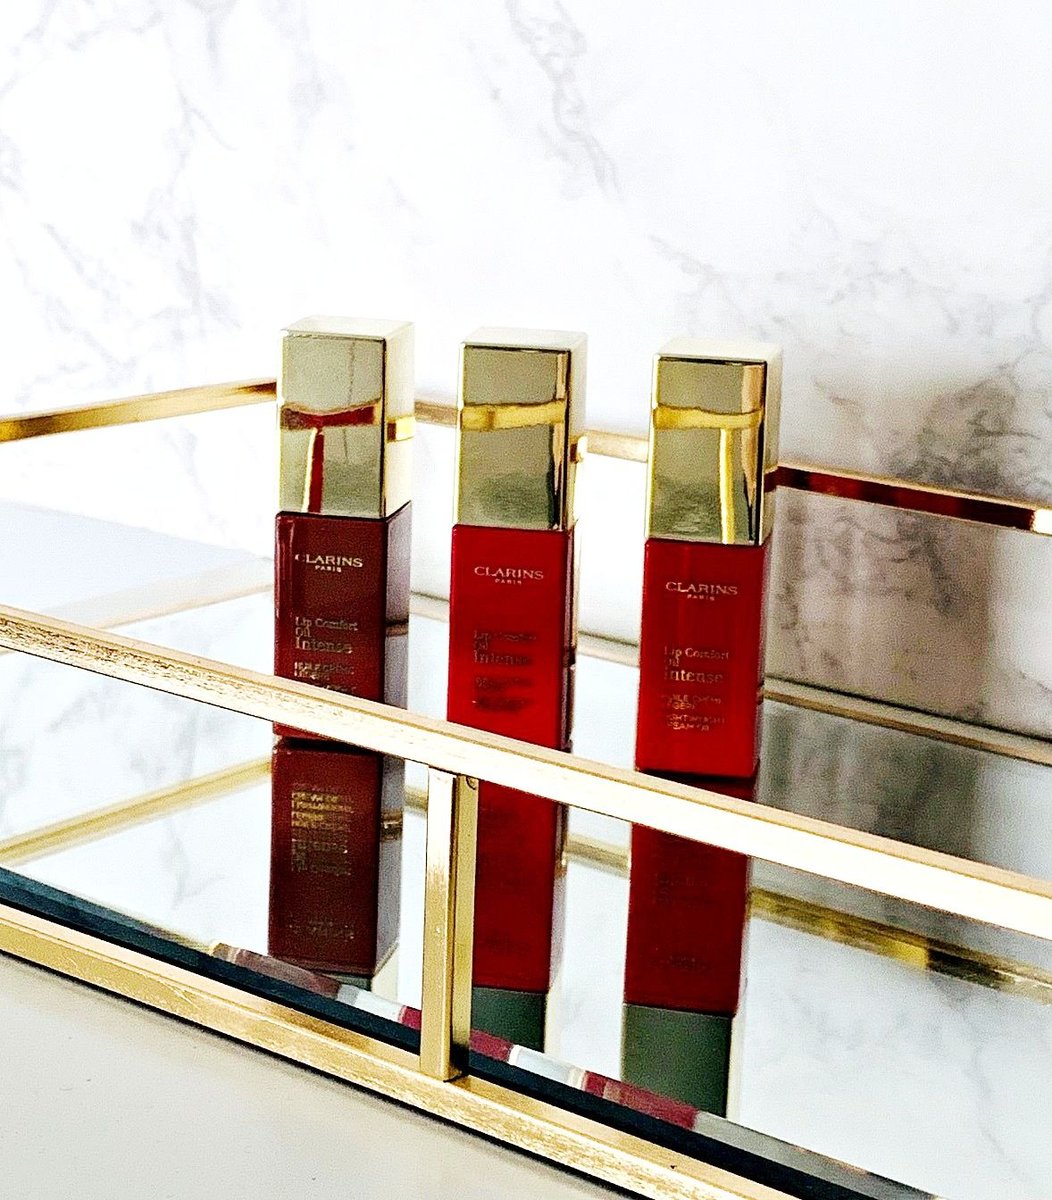 The brand that always gets lip products right - @clarins_uk tinyurl.com/t6wpcvn @theblogsRT @blogging_RT @HarmonyBloggers #BloggersTribe #bbloggers